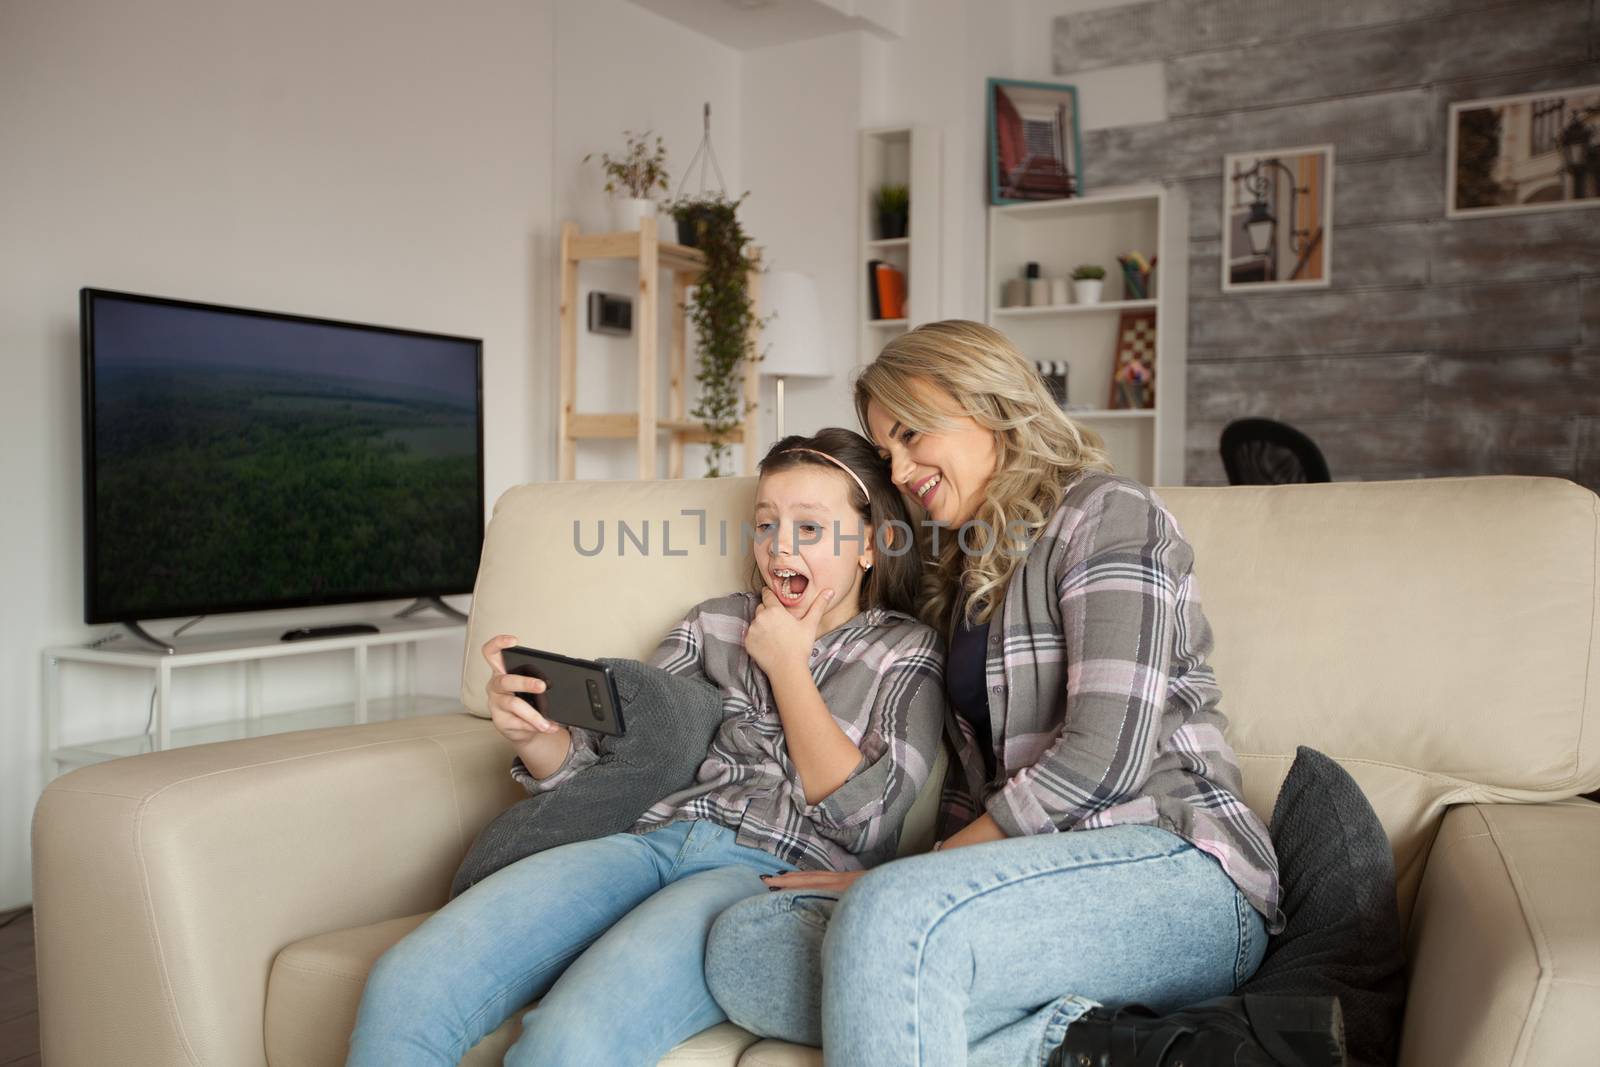 Shocked little girl white braces while using her smartphone sitting next to her mum on the couch in living room.